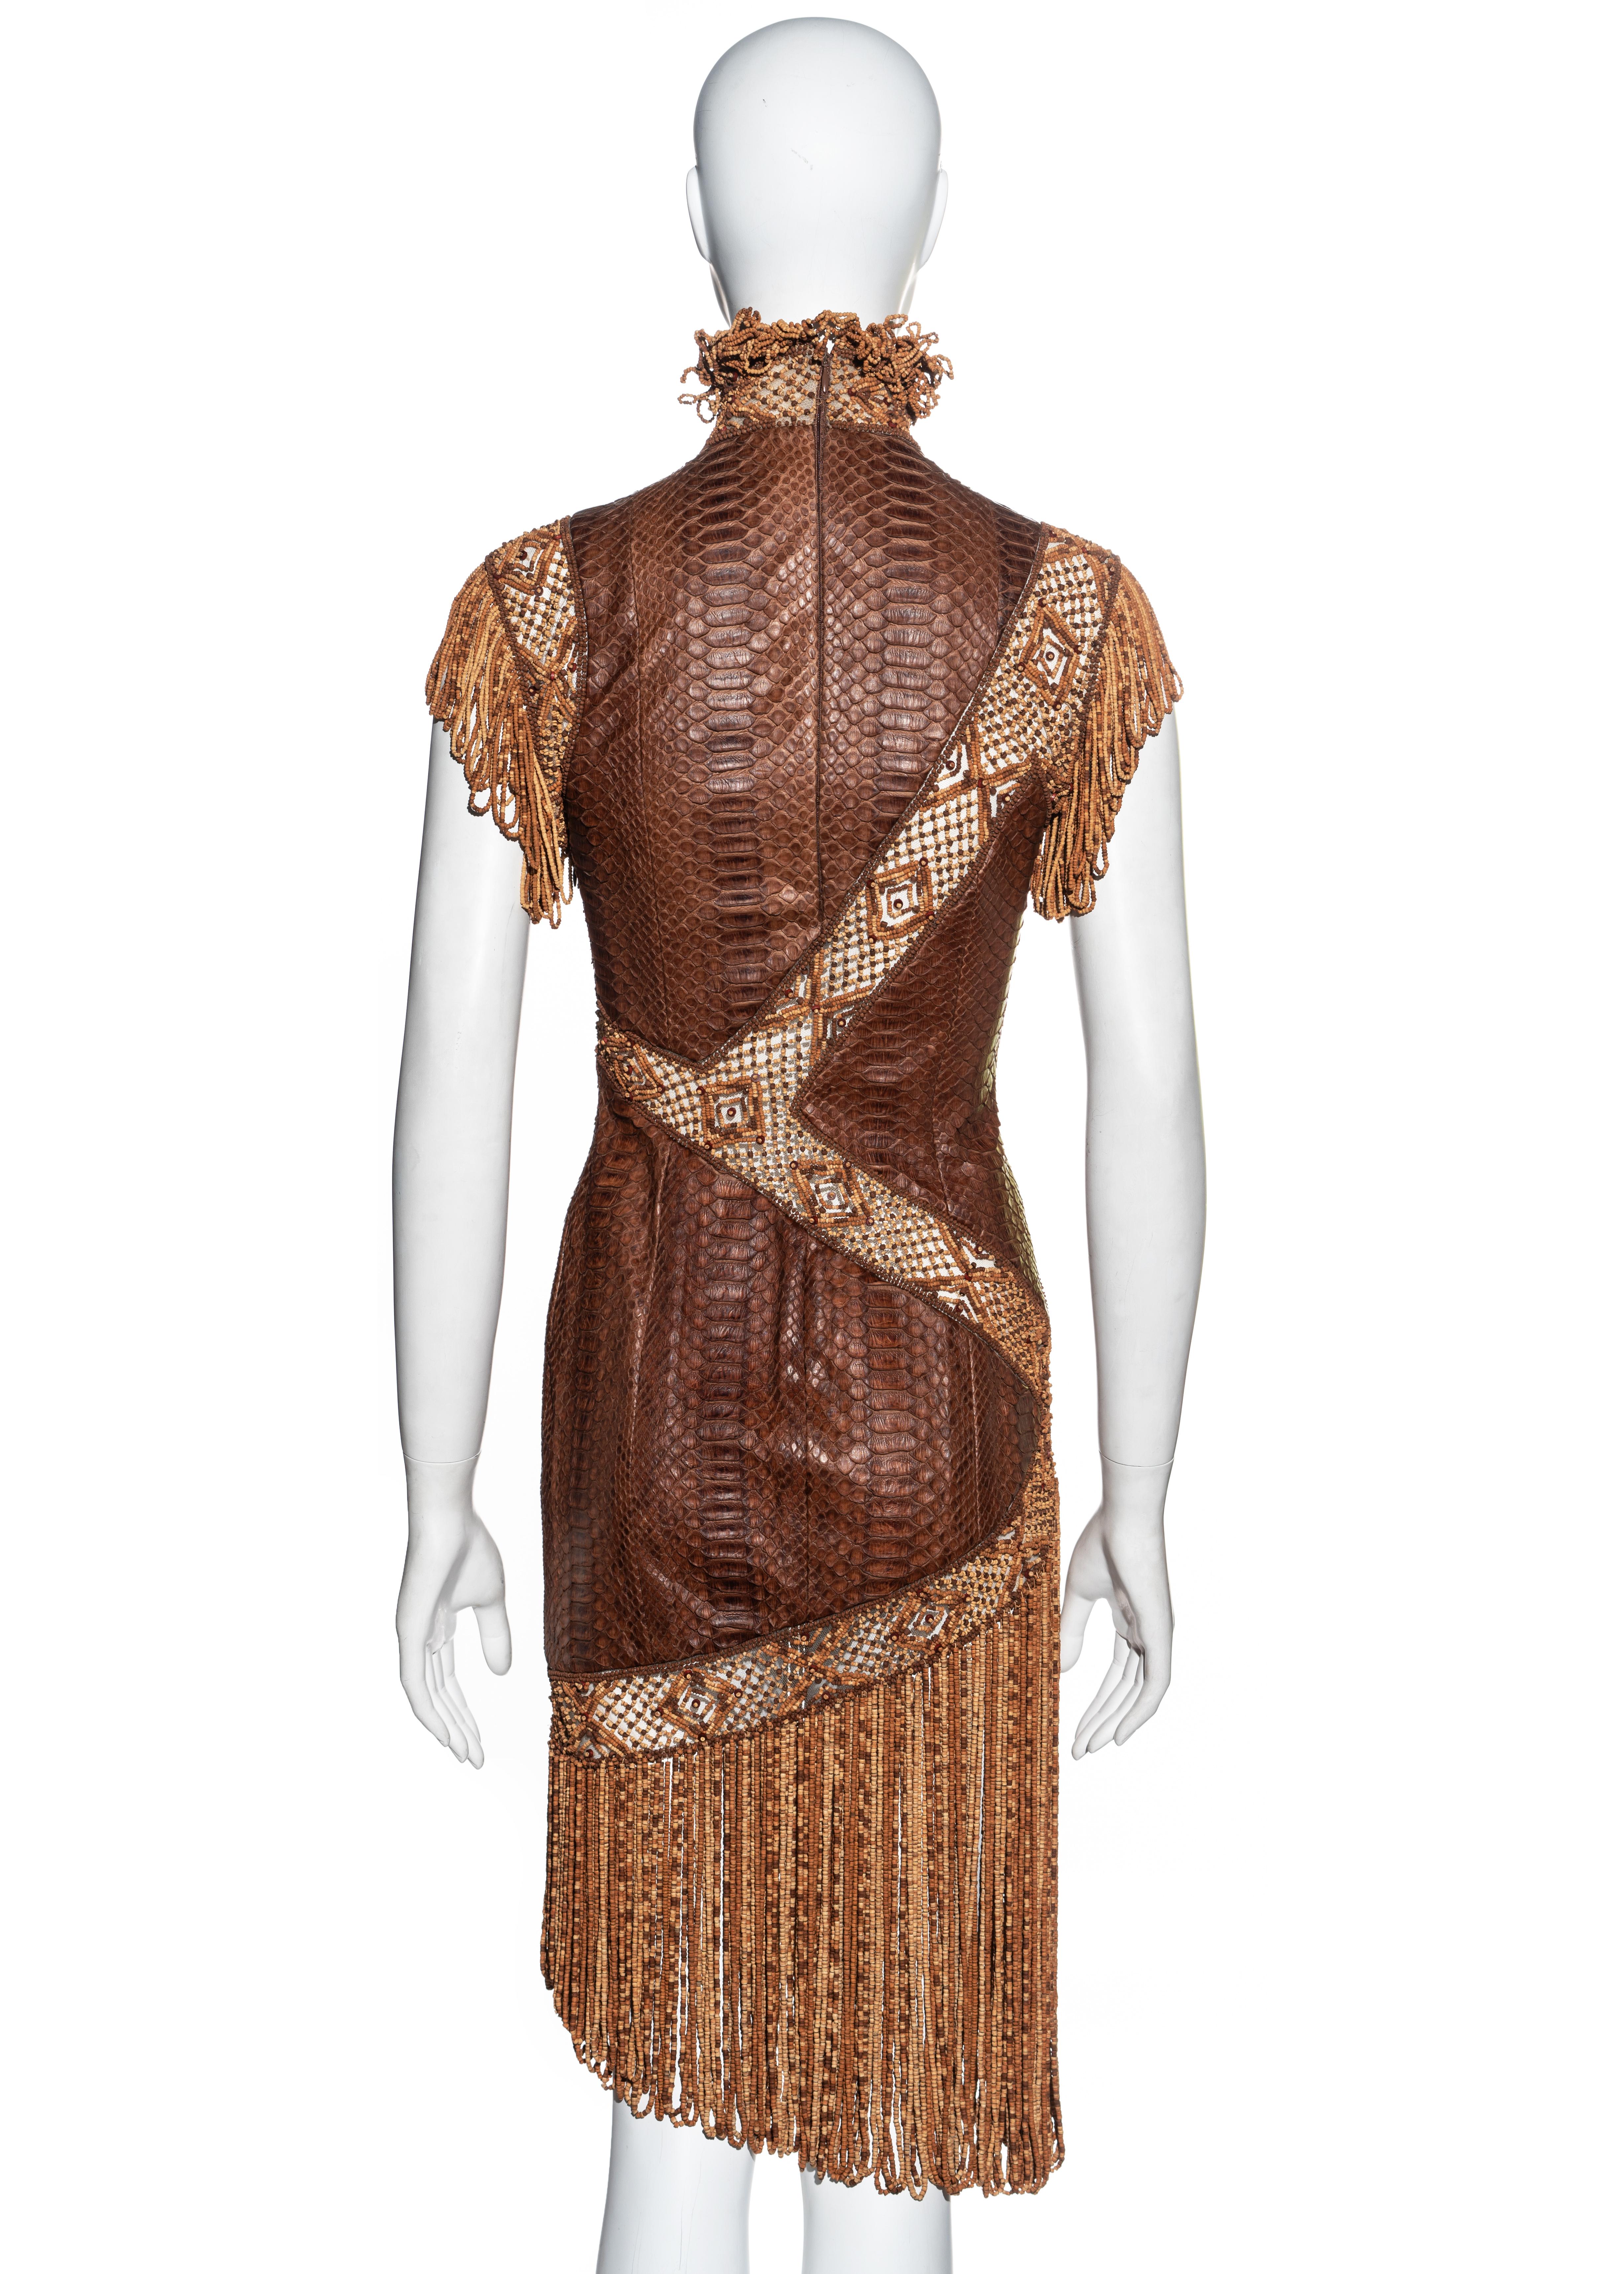 Givenchy by Alexander McQueen Haute Couture brown snakeskin dress, ss 2001 2